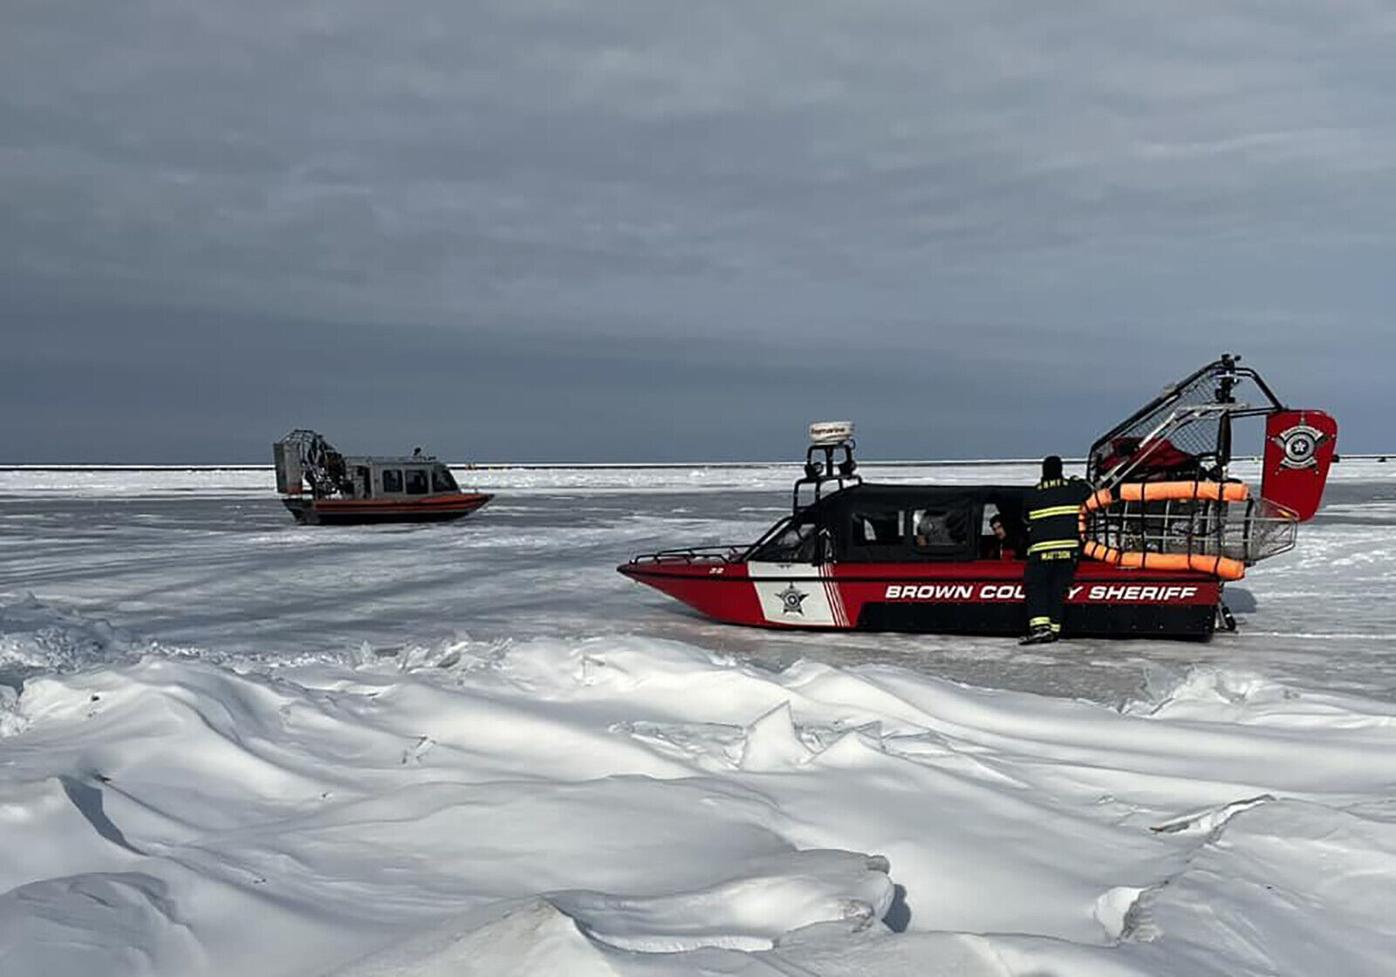 At least 34 people rescued after they became stranded on a floating chunk of ice in Green Bay